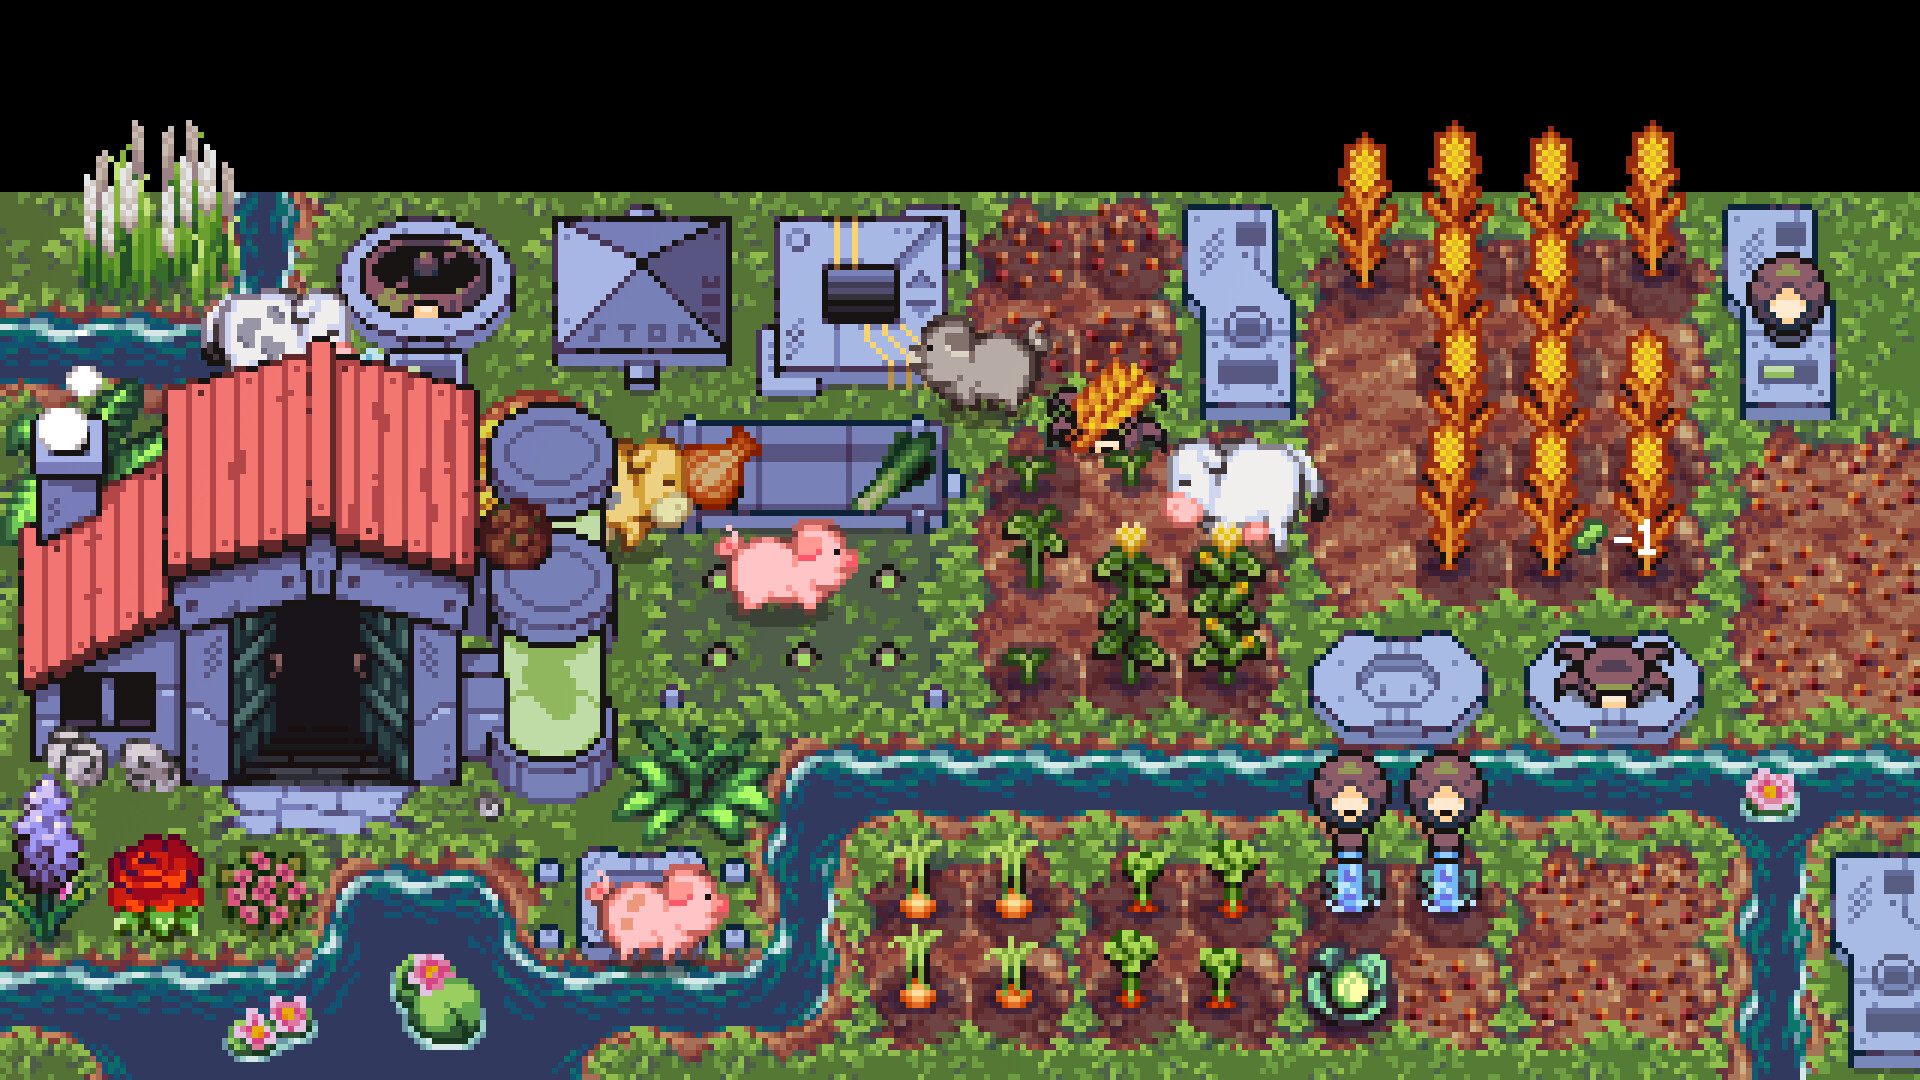 I tried to turn this idle Stardew Valley-like into a nightmarish Palworld-style dystopia, but it fought back by bankrupting me